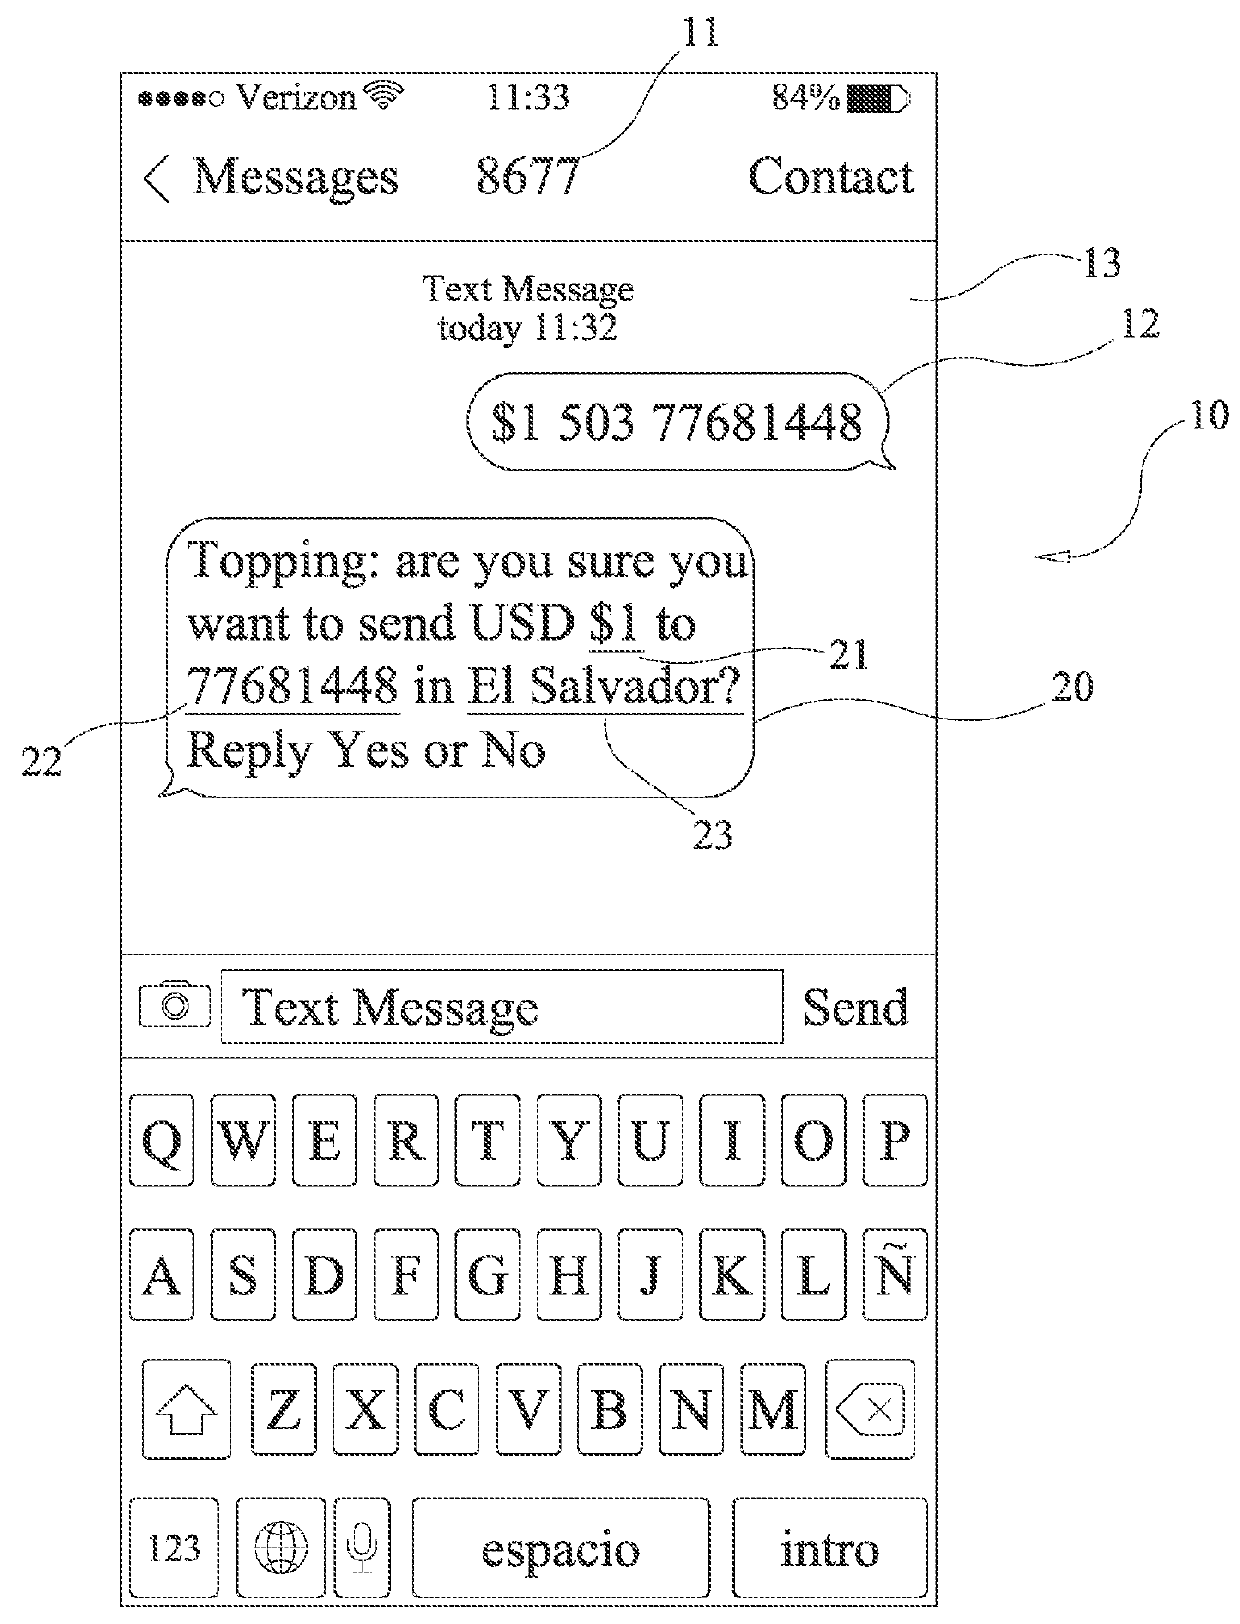 Method for financing purchases for others using a sender's charge account